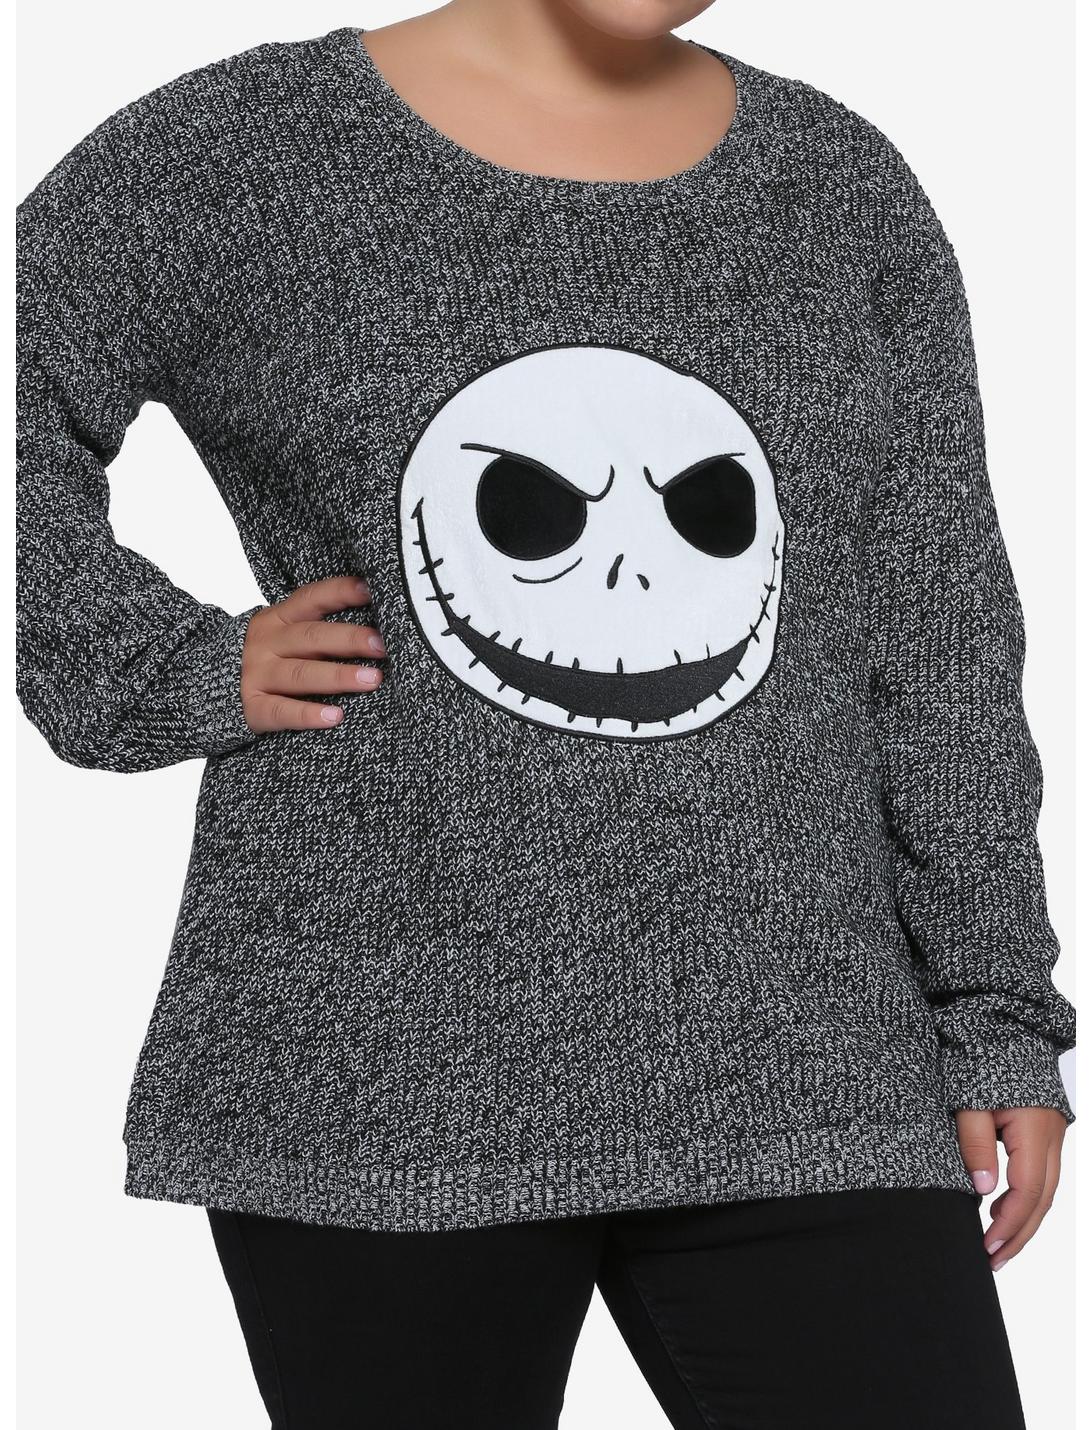 The Nightmare Before Jack Elbow Patch Girls Sweater Plus Size, MULTI, hi-res